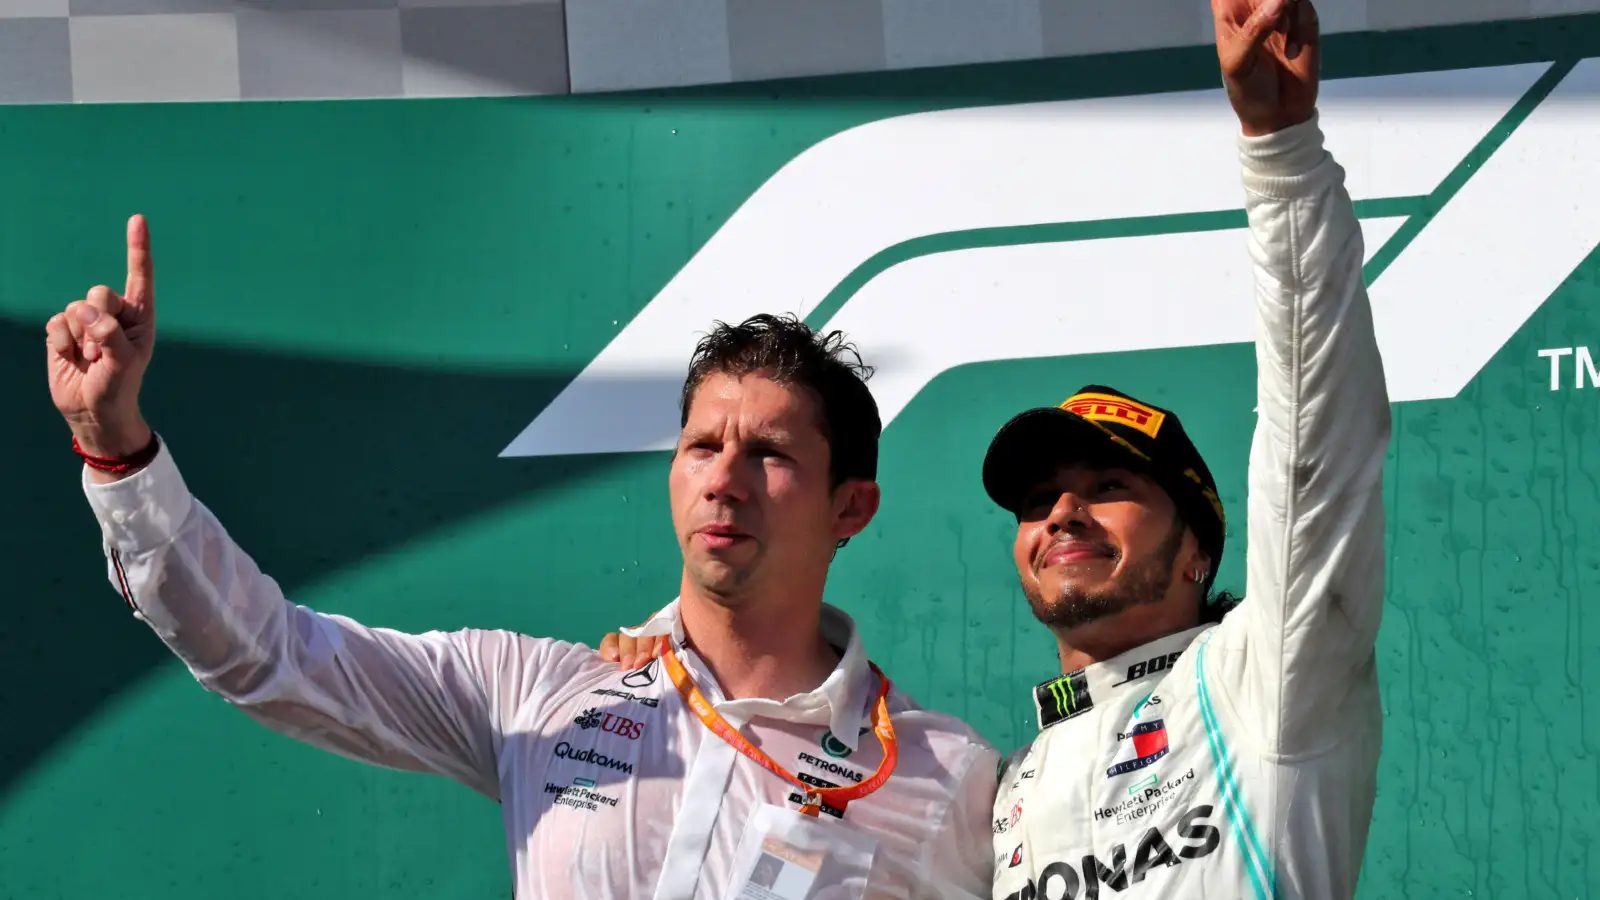 Mercedes' James Vowles celebrates on the podium with Lewis Hamilton at the 2019 Hungarian Grand Prix.